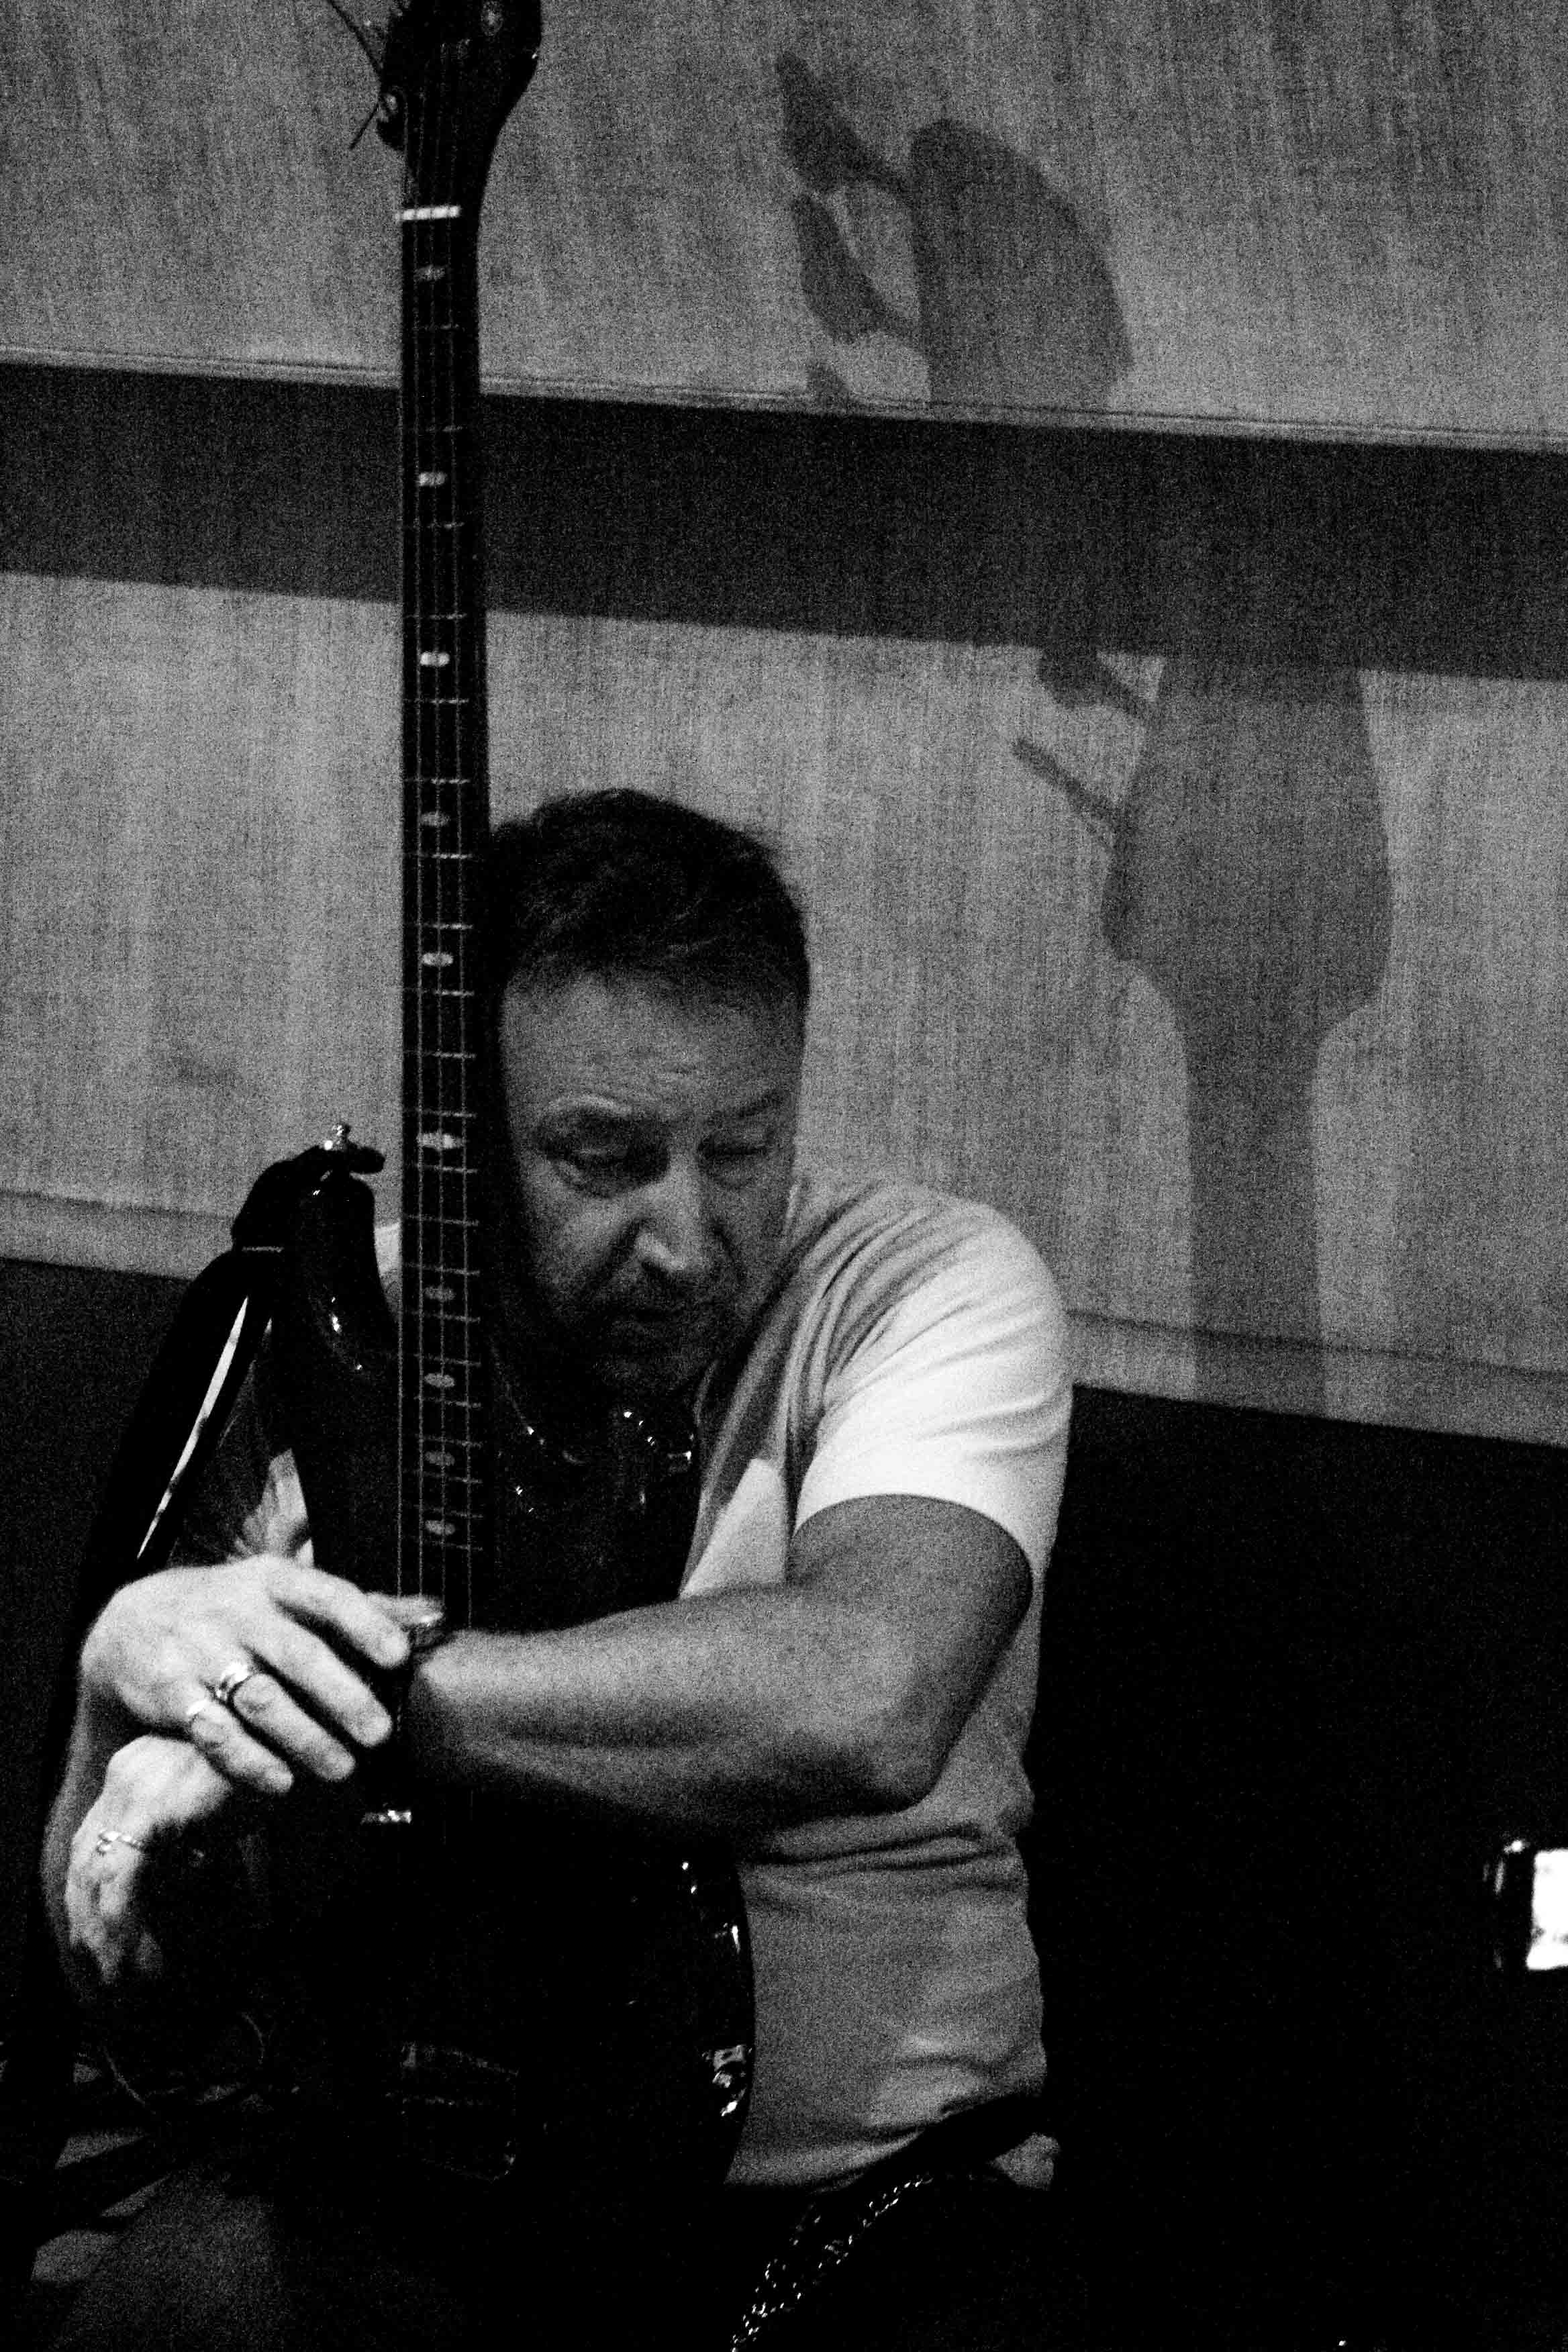 Peter Hook of Joy Division and New Order